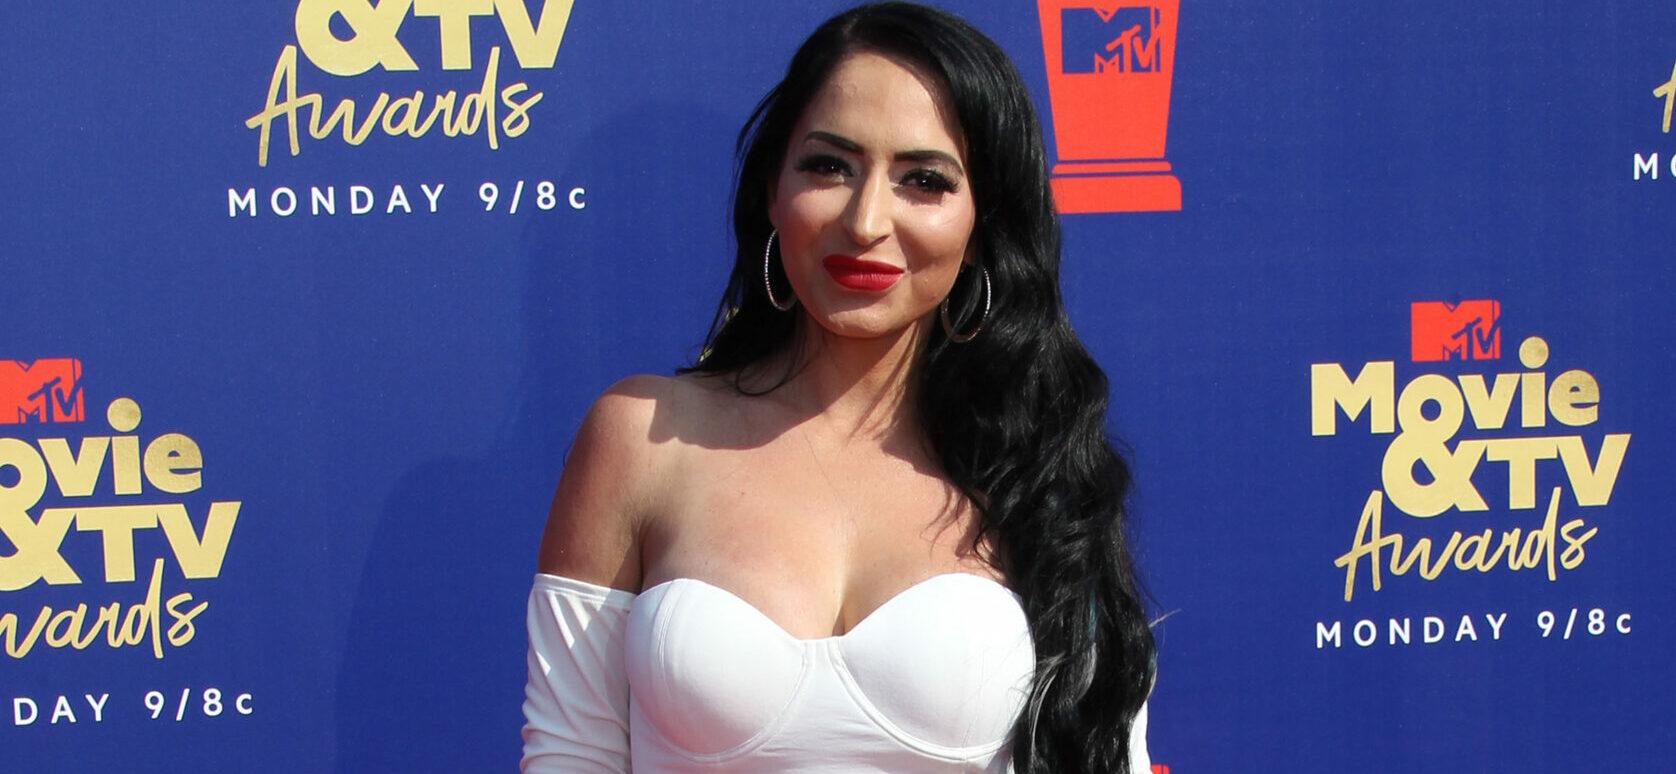 'Jersey Shore' Star Angelina Pivarnick's Husband Files Divorce After 2 Years Of Marriage